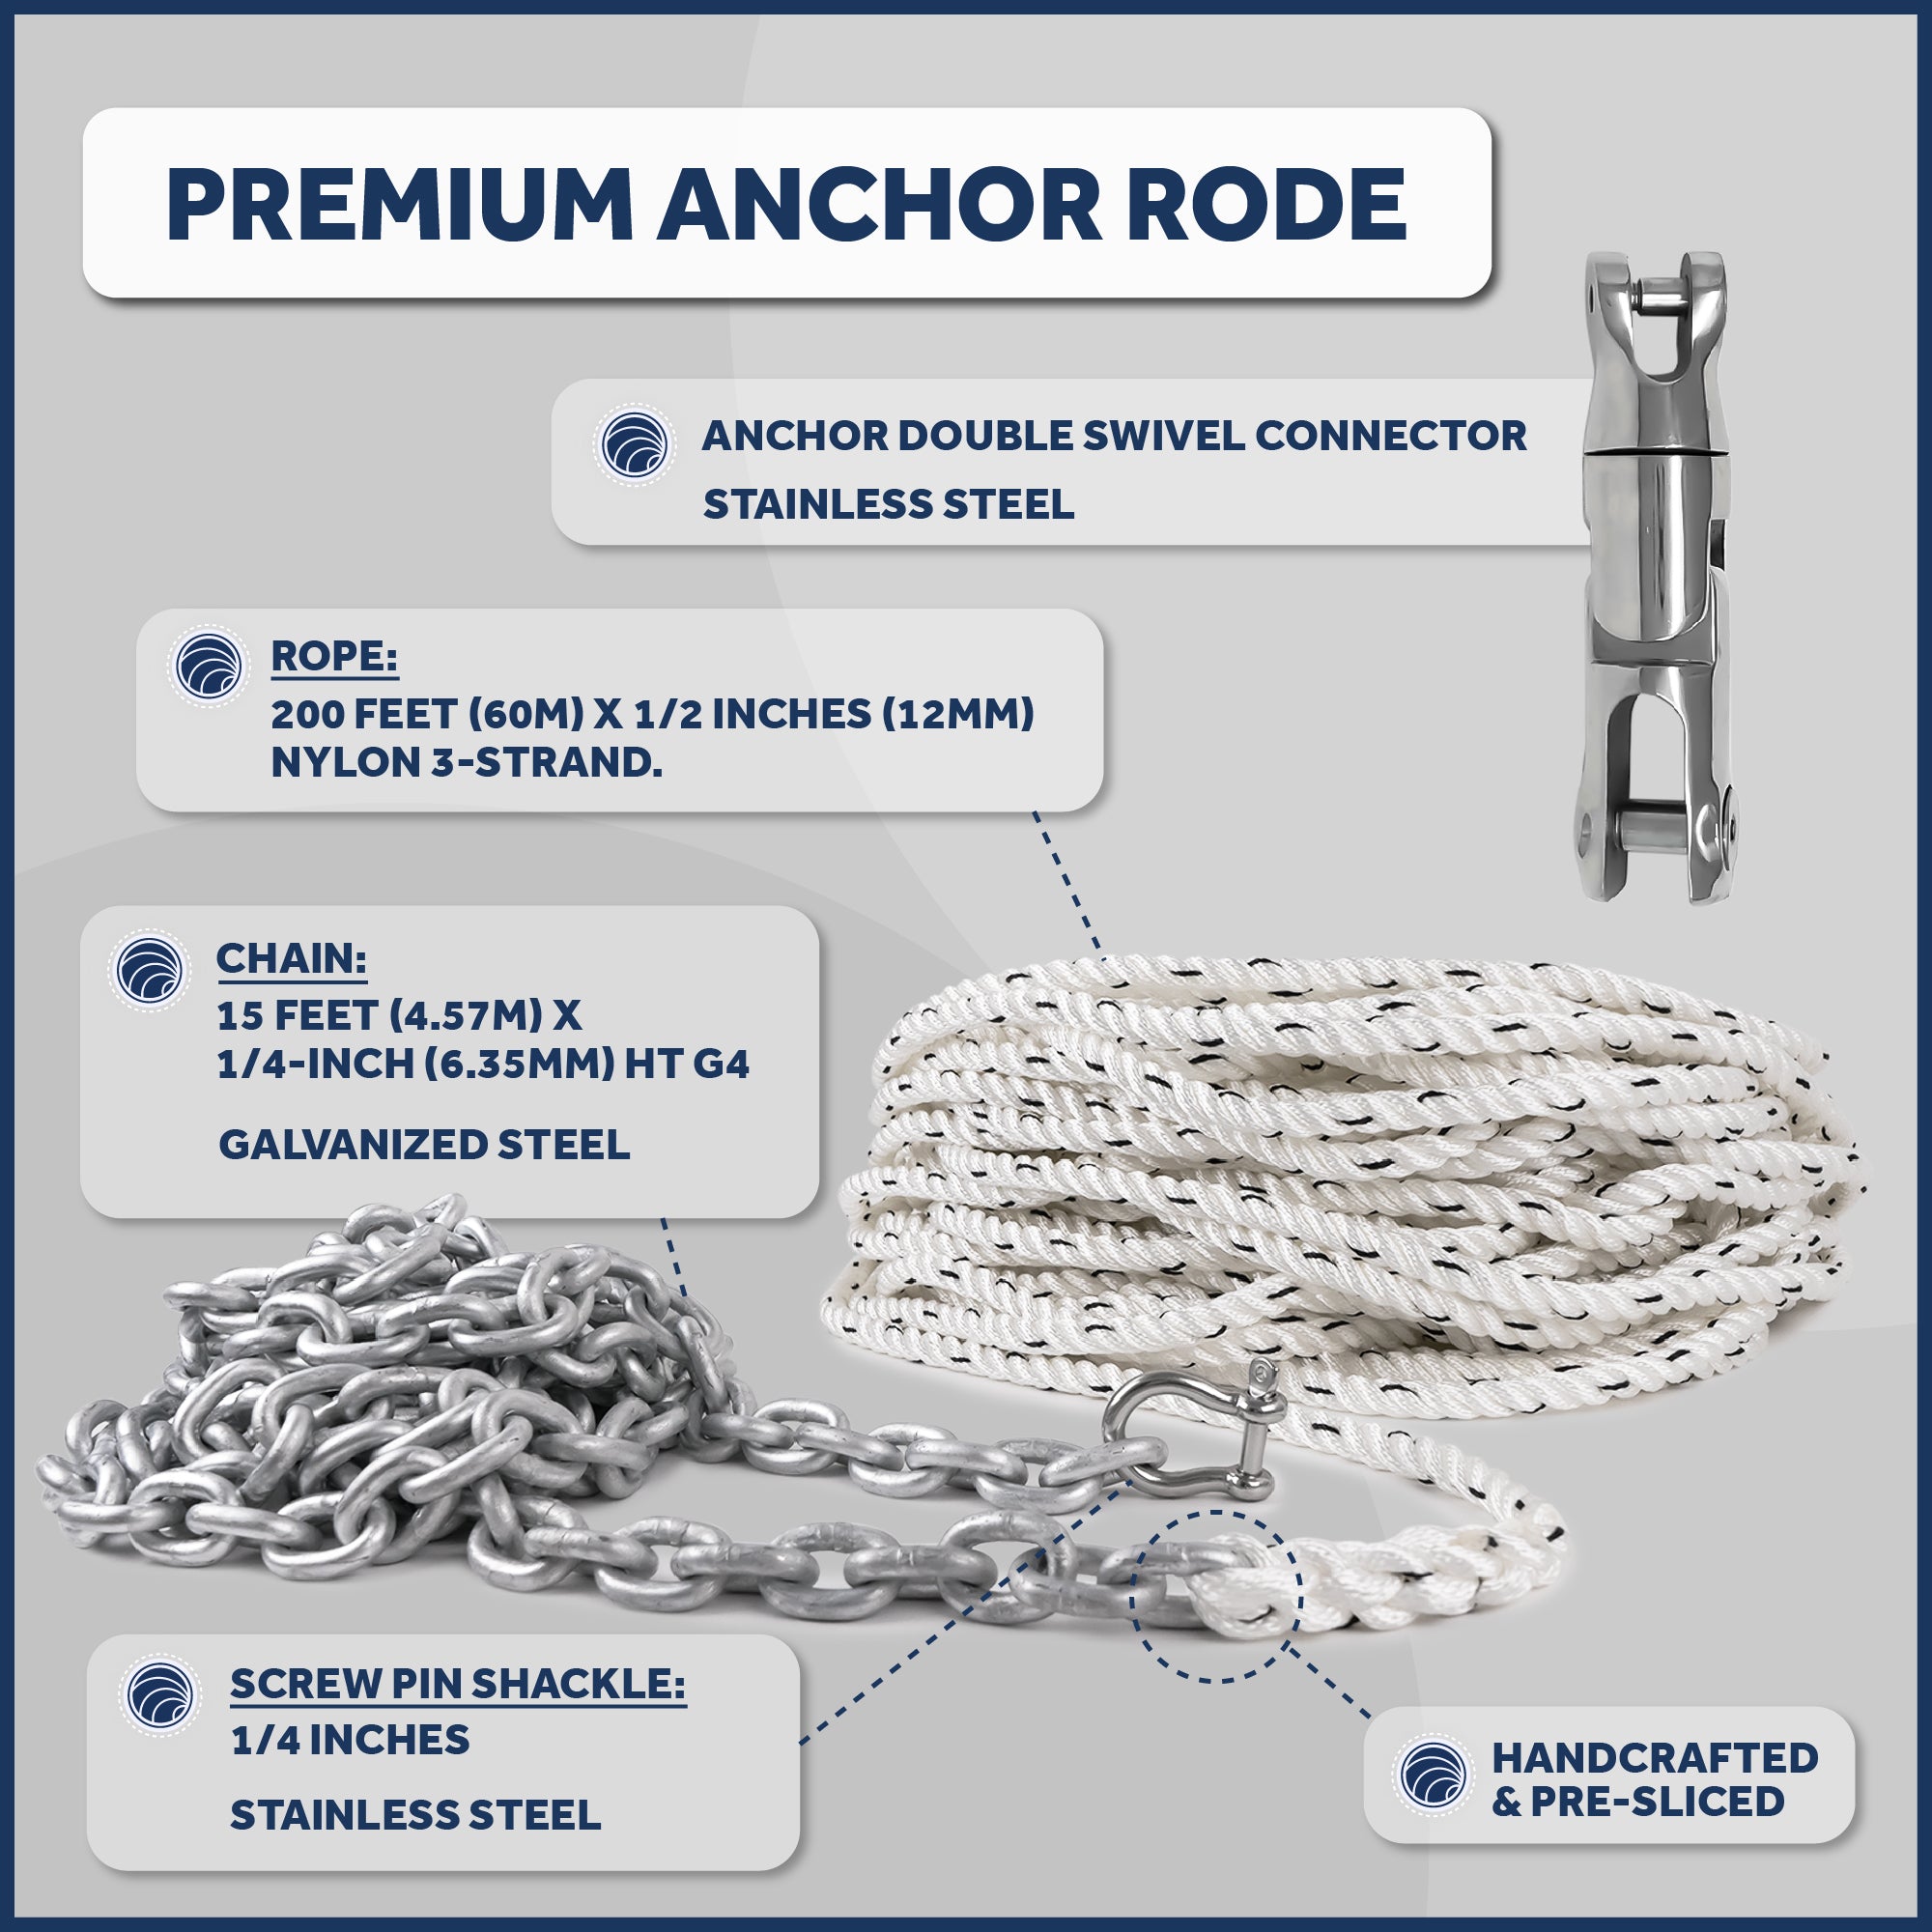 Pacific Windlass Kit, Vertical 600 Watts, 12V DC, 3-Strand Rope, Galvanized Steel HT G4 Chain, Swivel and Shackle - FO3931-C3